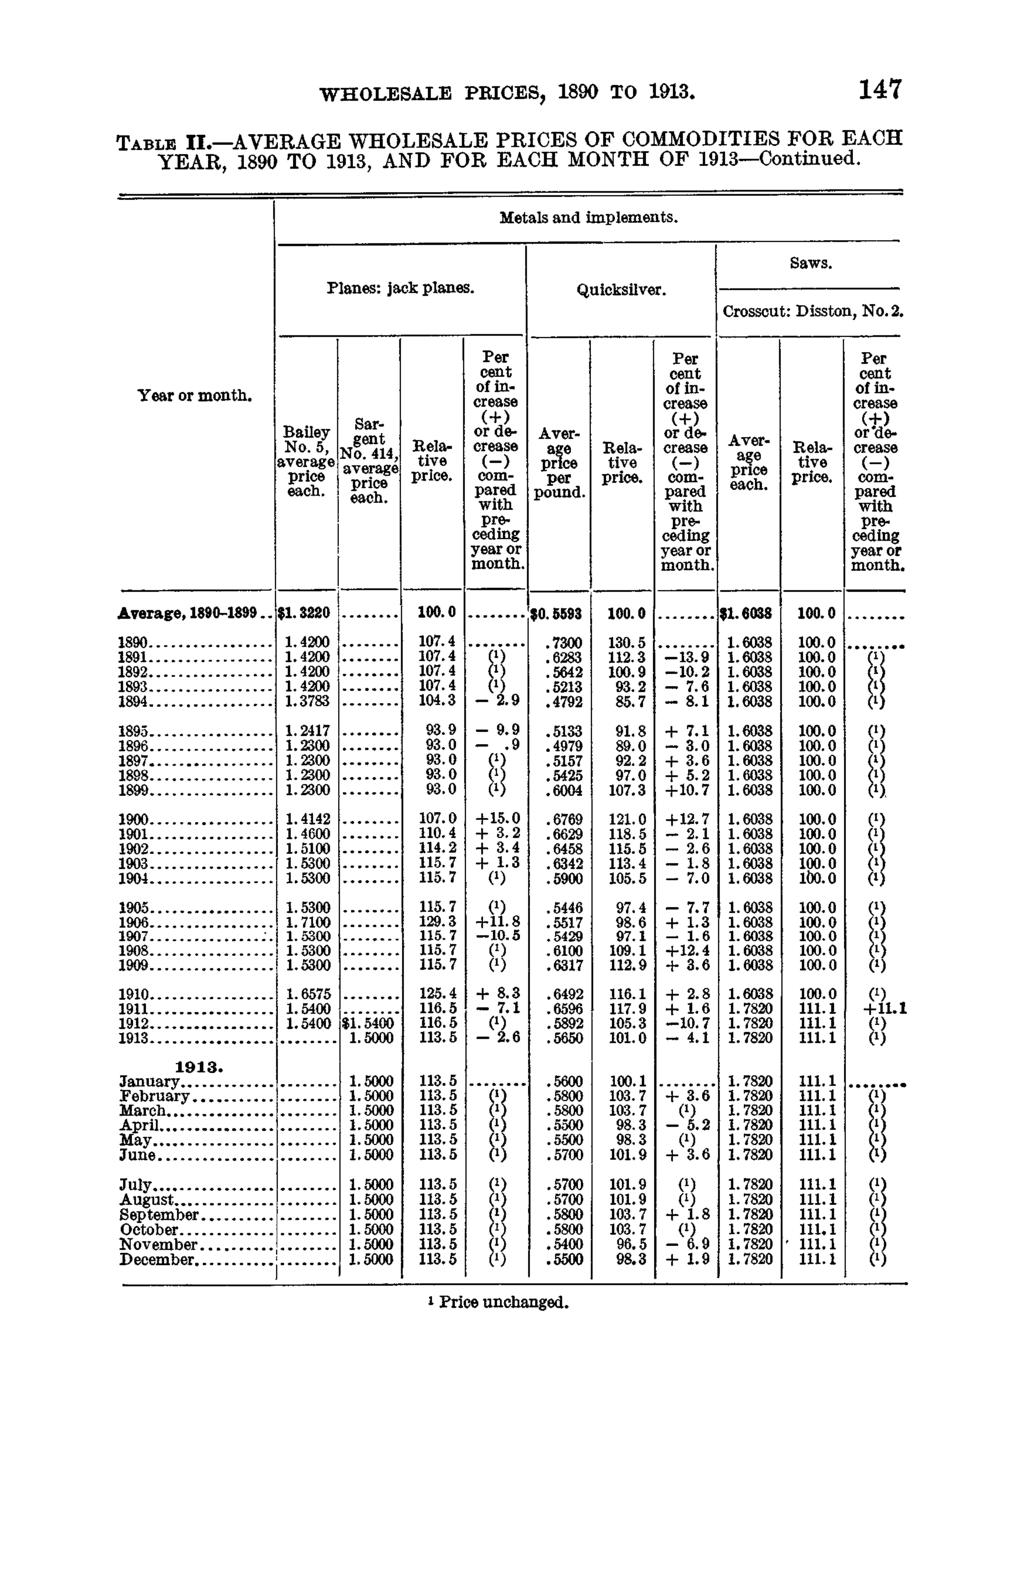 WHOLESALE PRICES, 1890 TO 1913, 1 4 7 T a b l e I I. AVERAGE WHOLESALE PRICES OF COMMODITIES FOR EACH YEAR, 1890 TO 1913, AND FOR EACH MONTH OF 1913 Continued. Metals and implements.